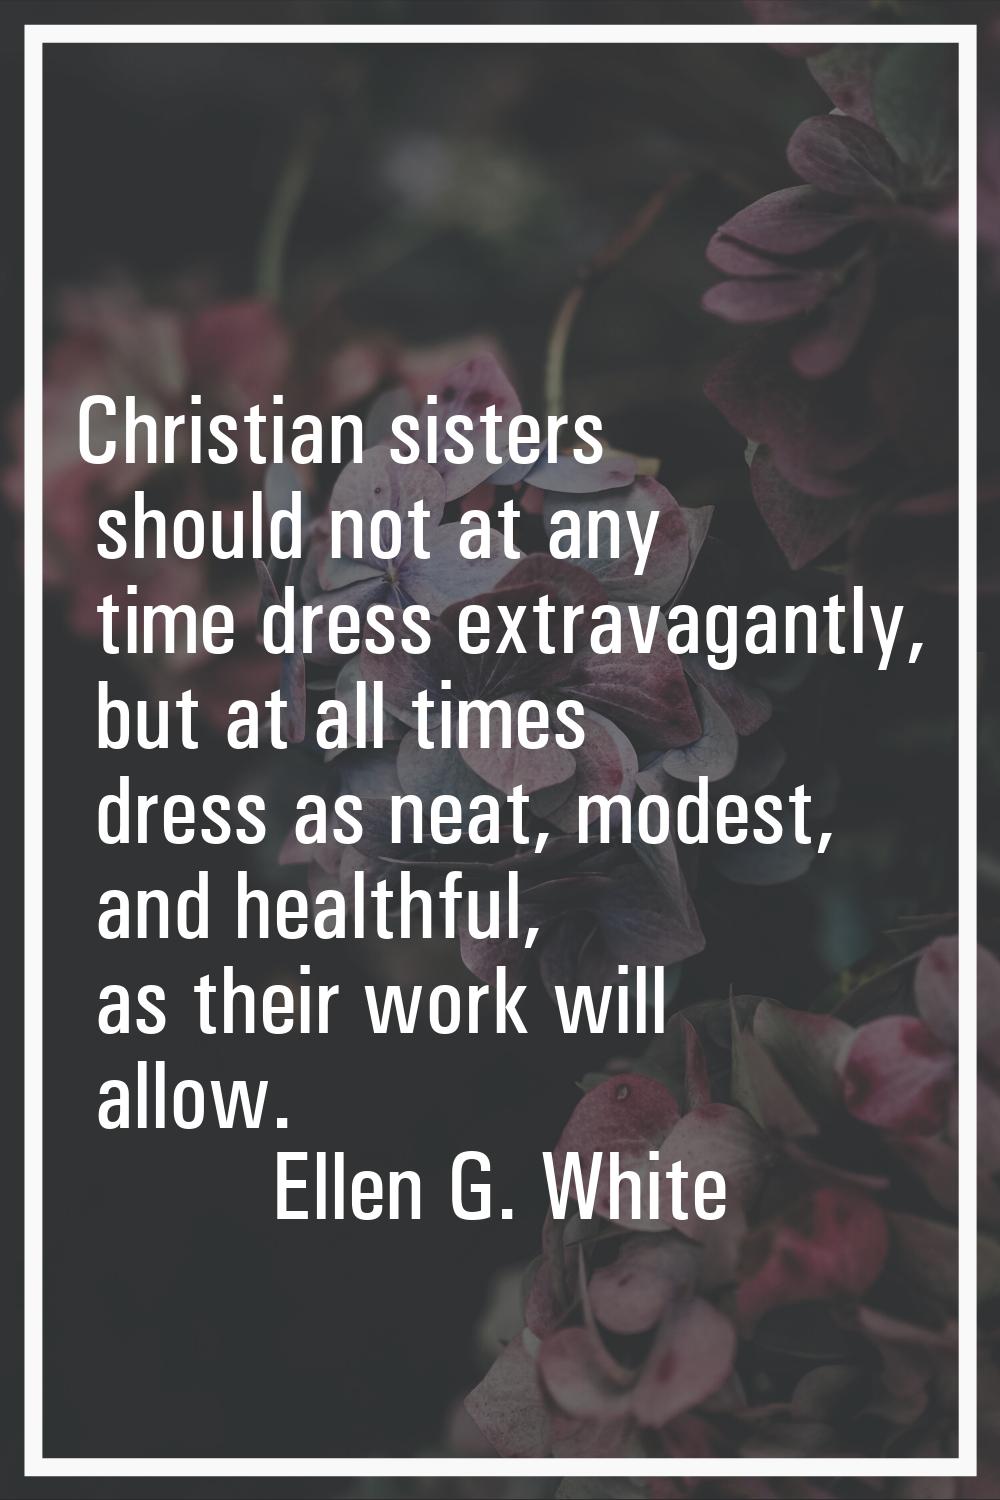 Christian sisters should not at any time dress extravagantly, but at all times dress as neat, modes